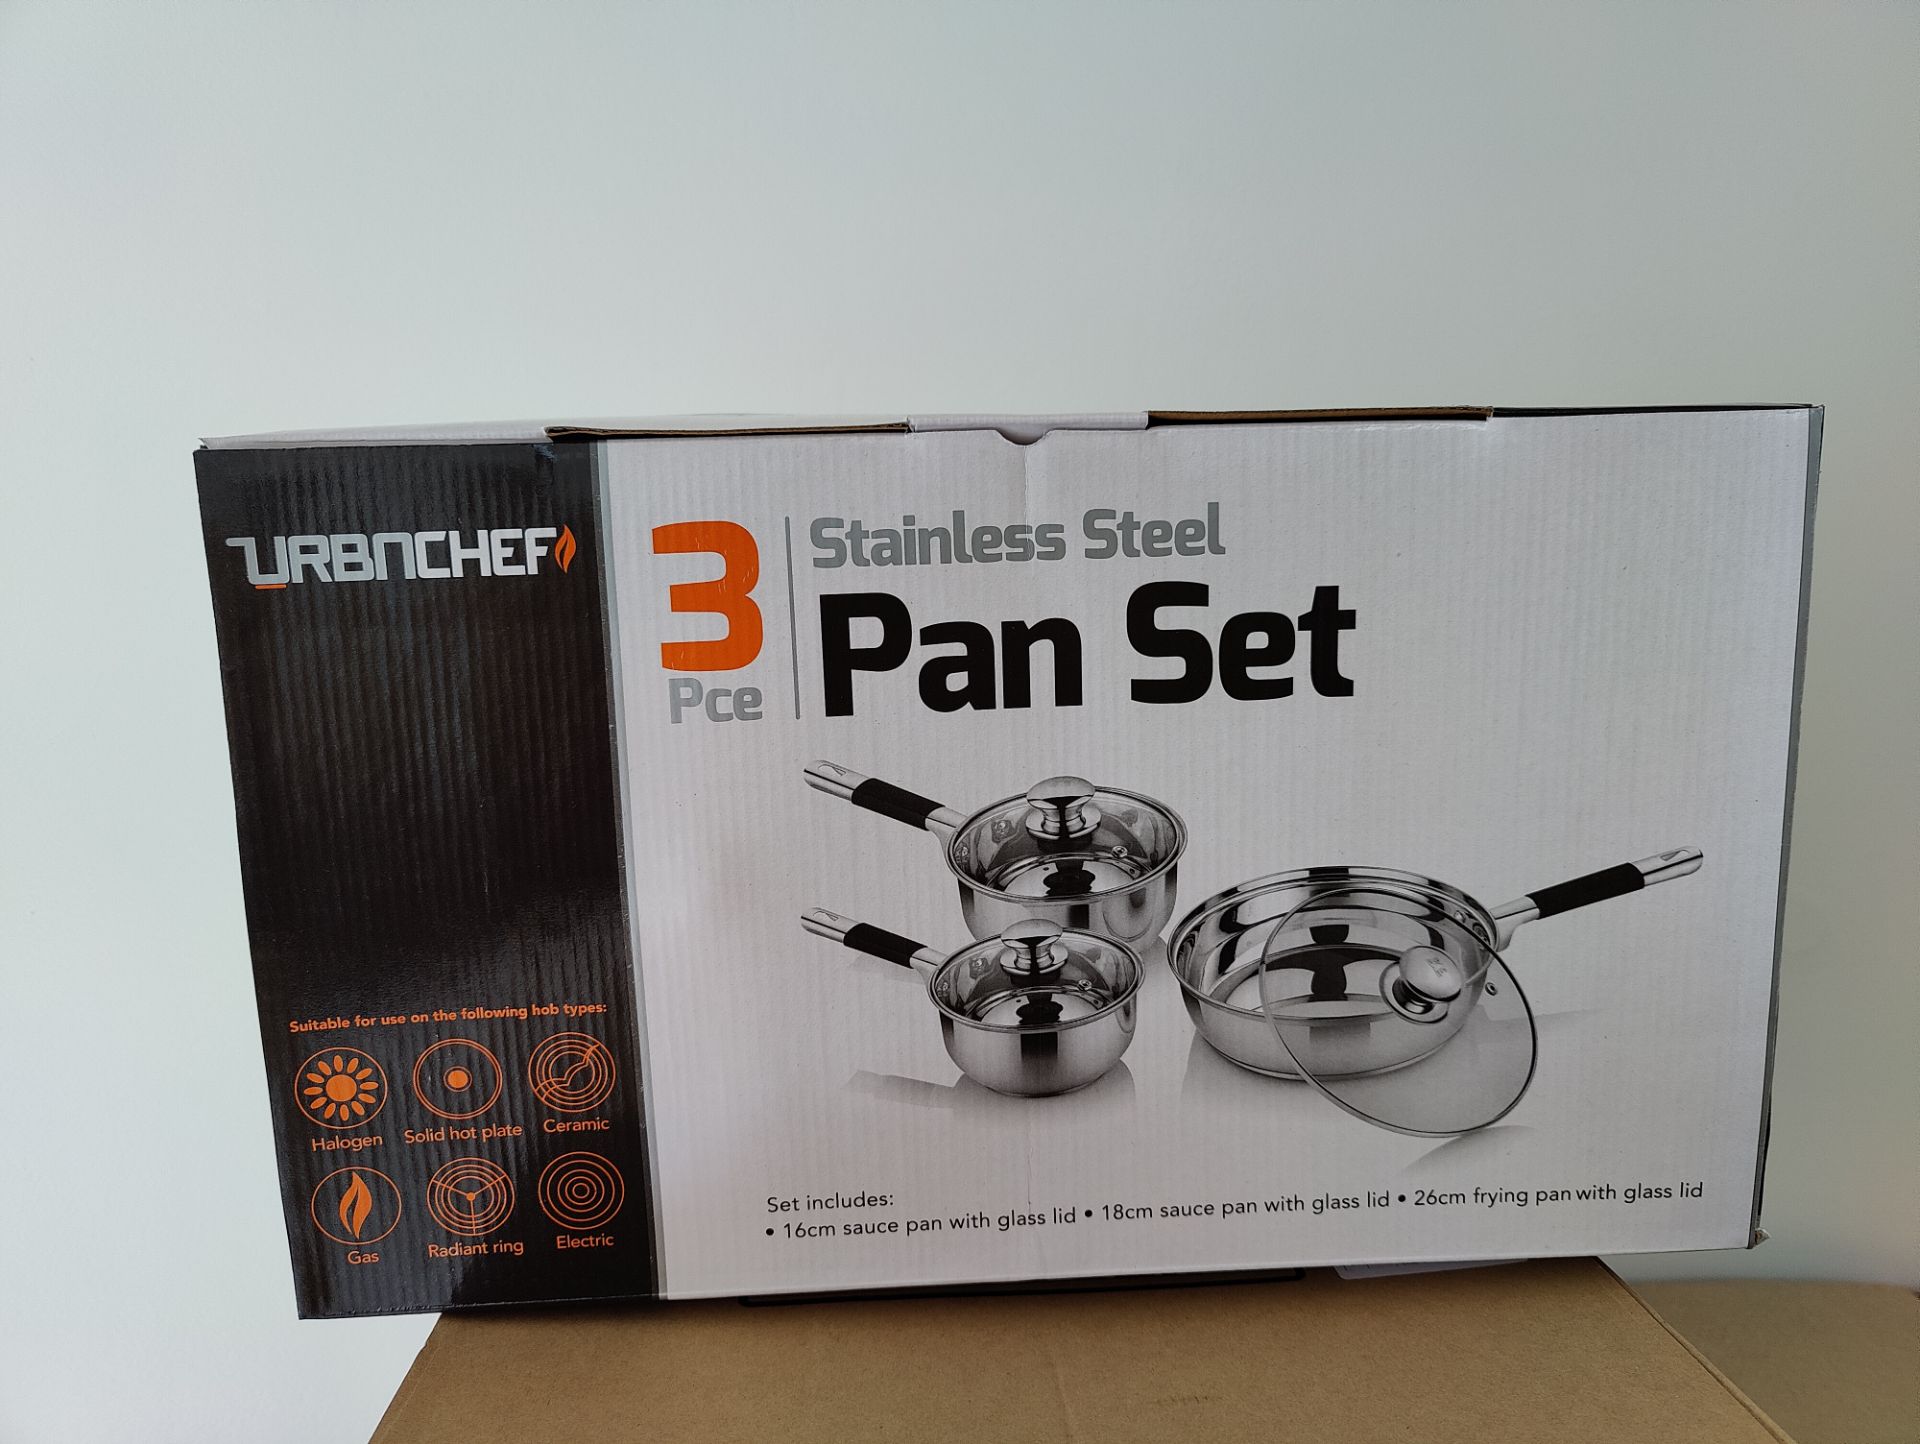 6 x Boxed Sets of Urbnchef 3 Piece Stainless Steel Pan Sets